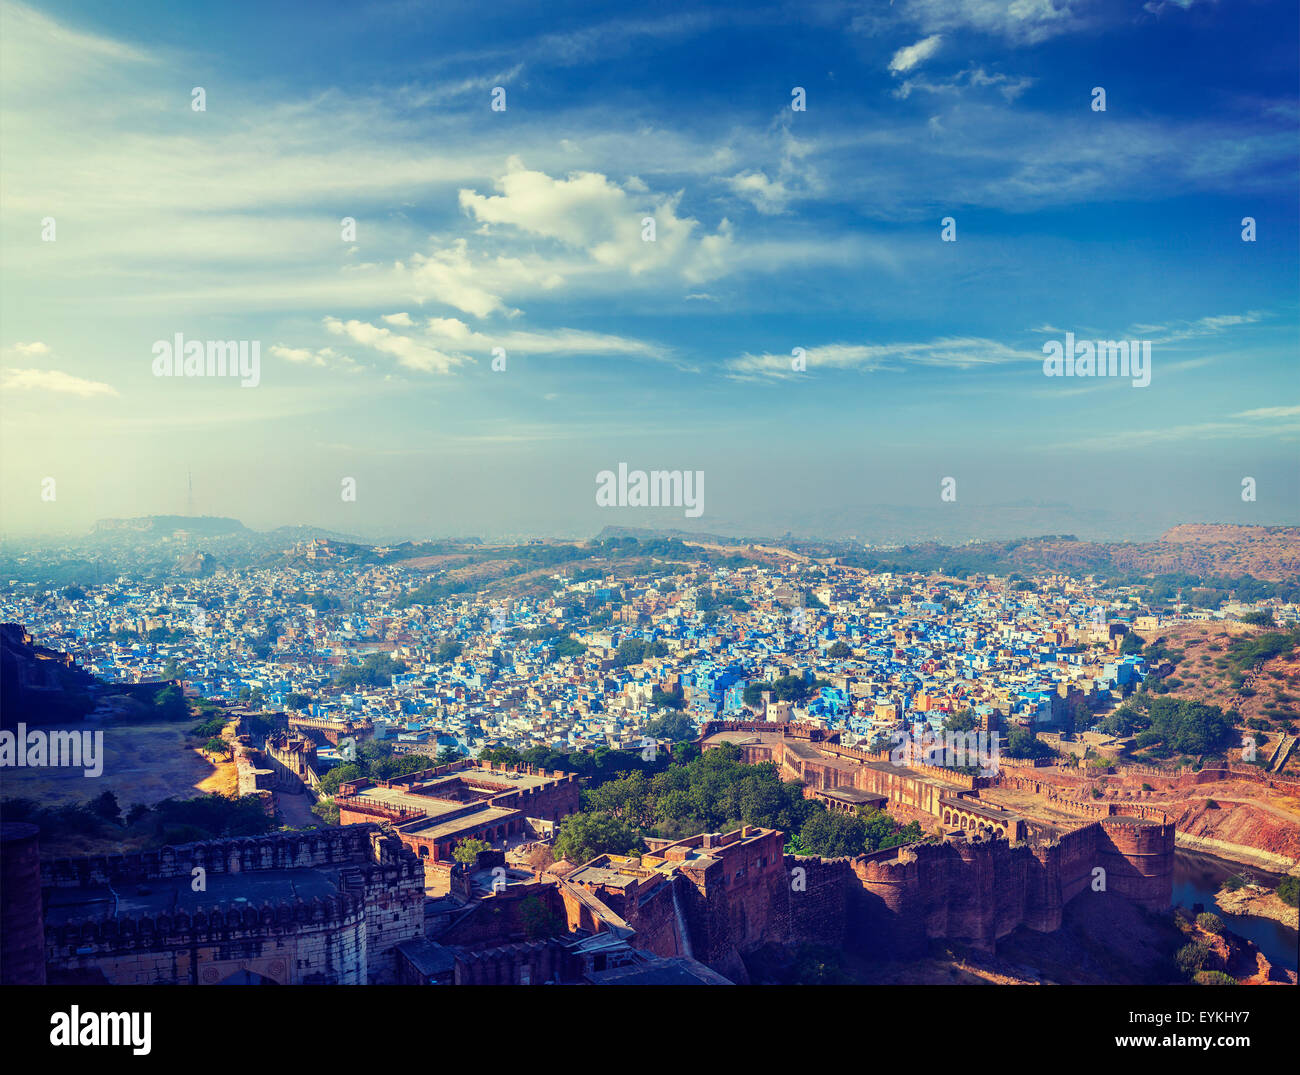 Vintage retro effect filtered hipster style panorama image of Jodhpur, known as Blue City due to blue-painted Brahmin houses Stock Photo